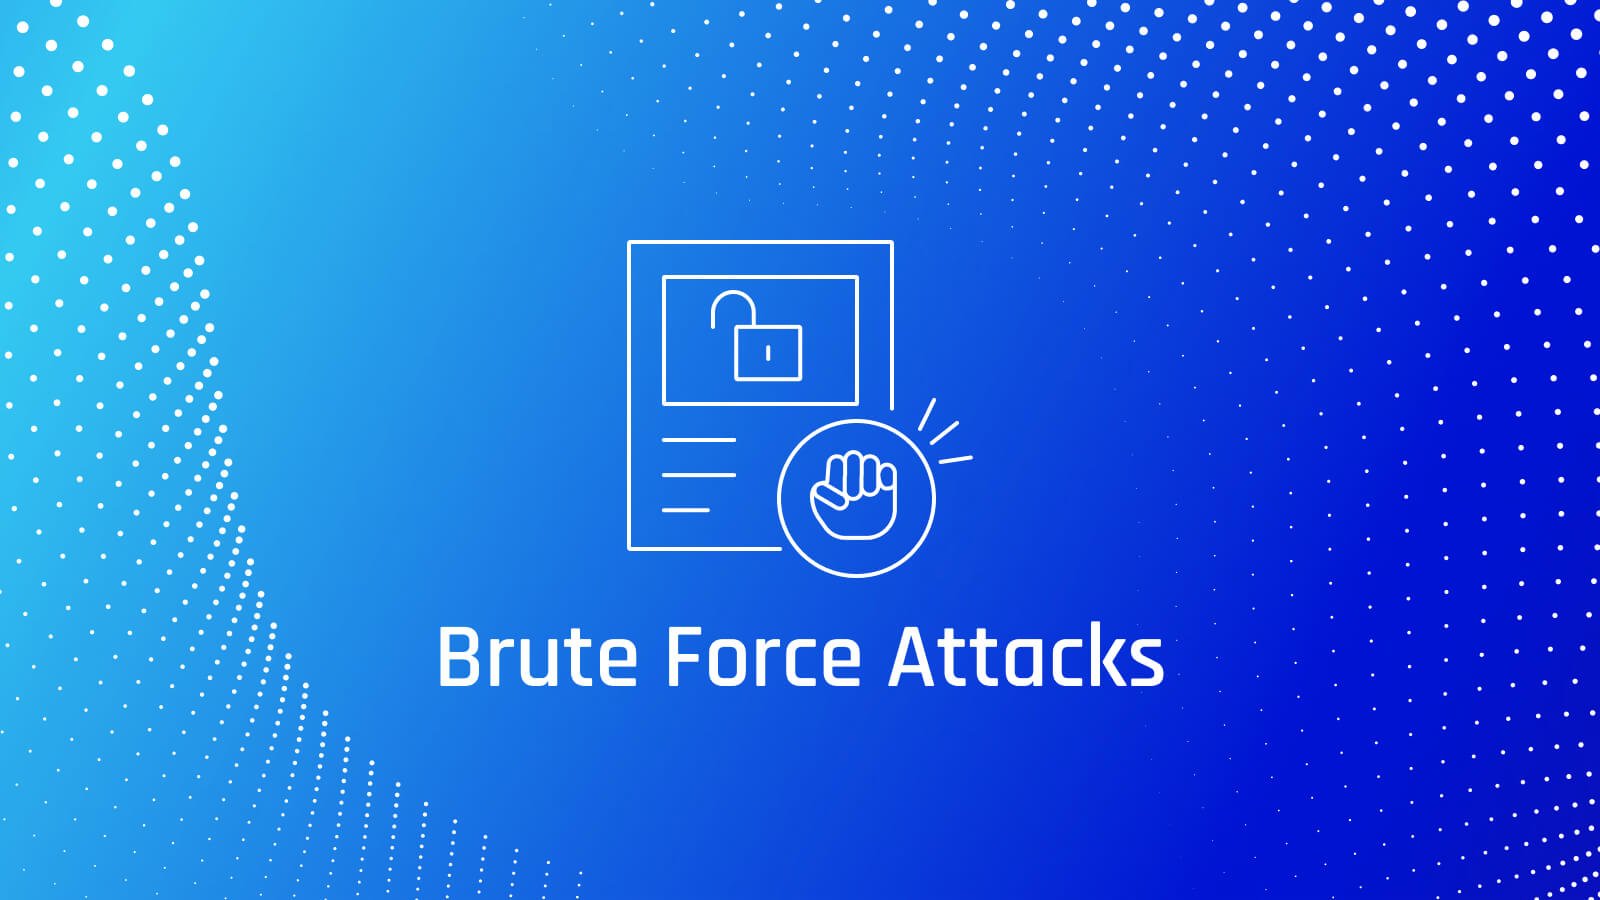 Brute-Force Attacks: What You Need to Know